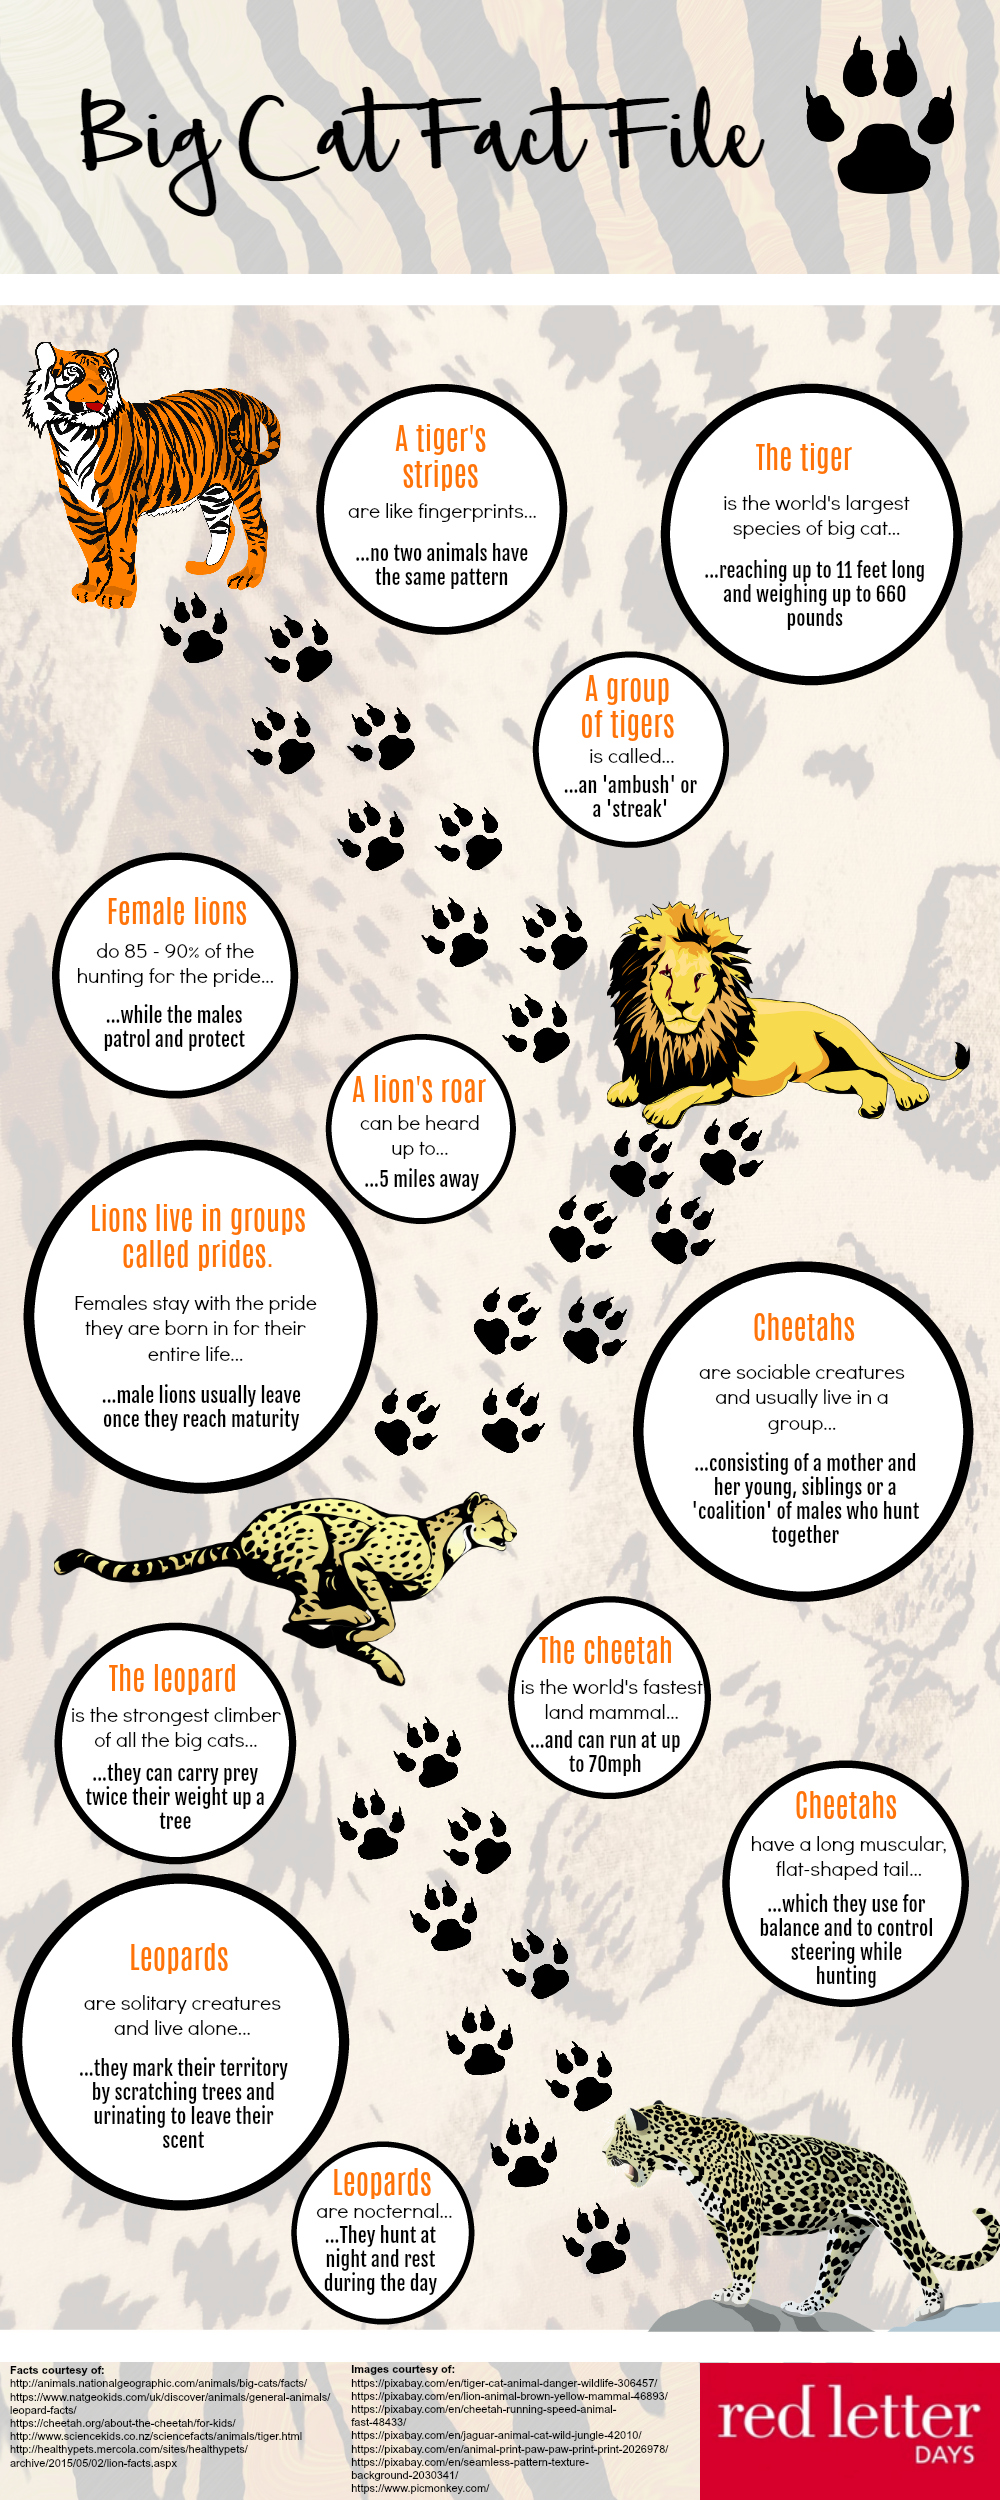 Big Cat Fact File Infographic